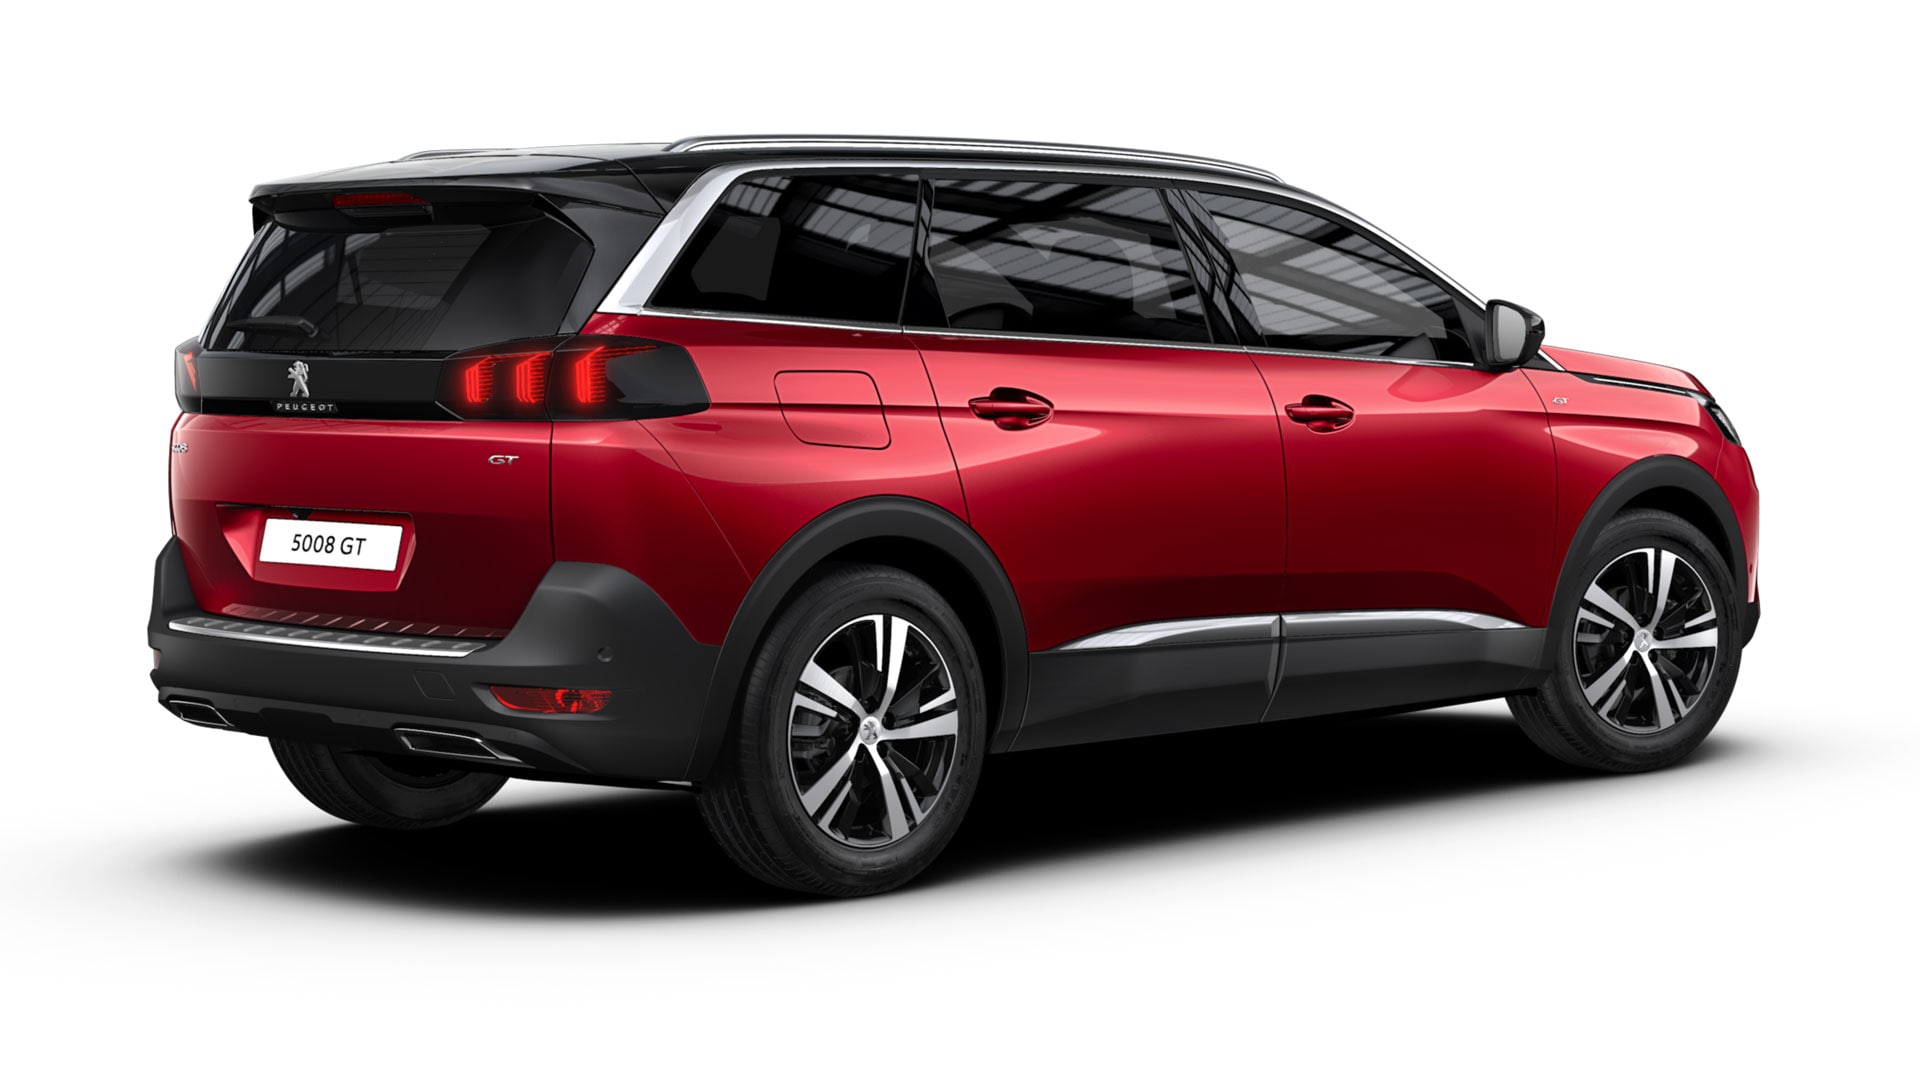 PEUGEOT 5008 SUV 7 independent seats